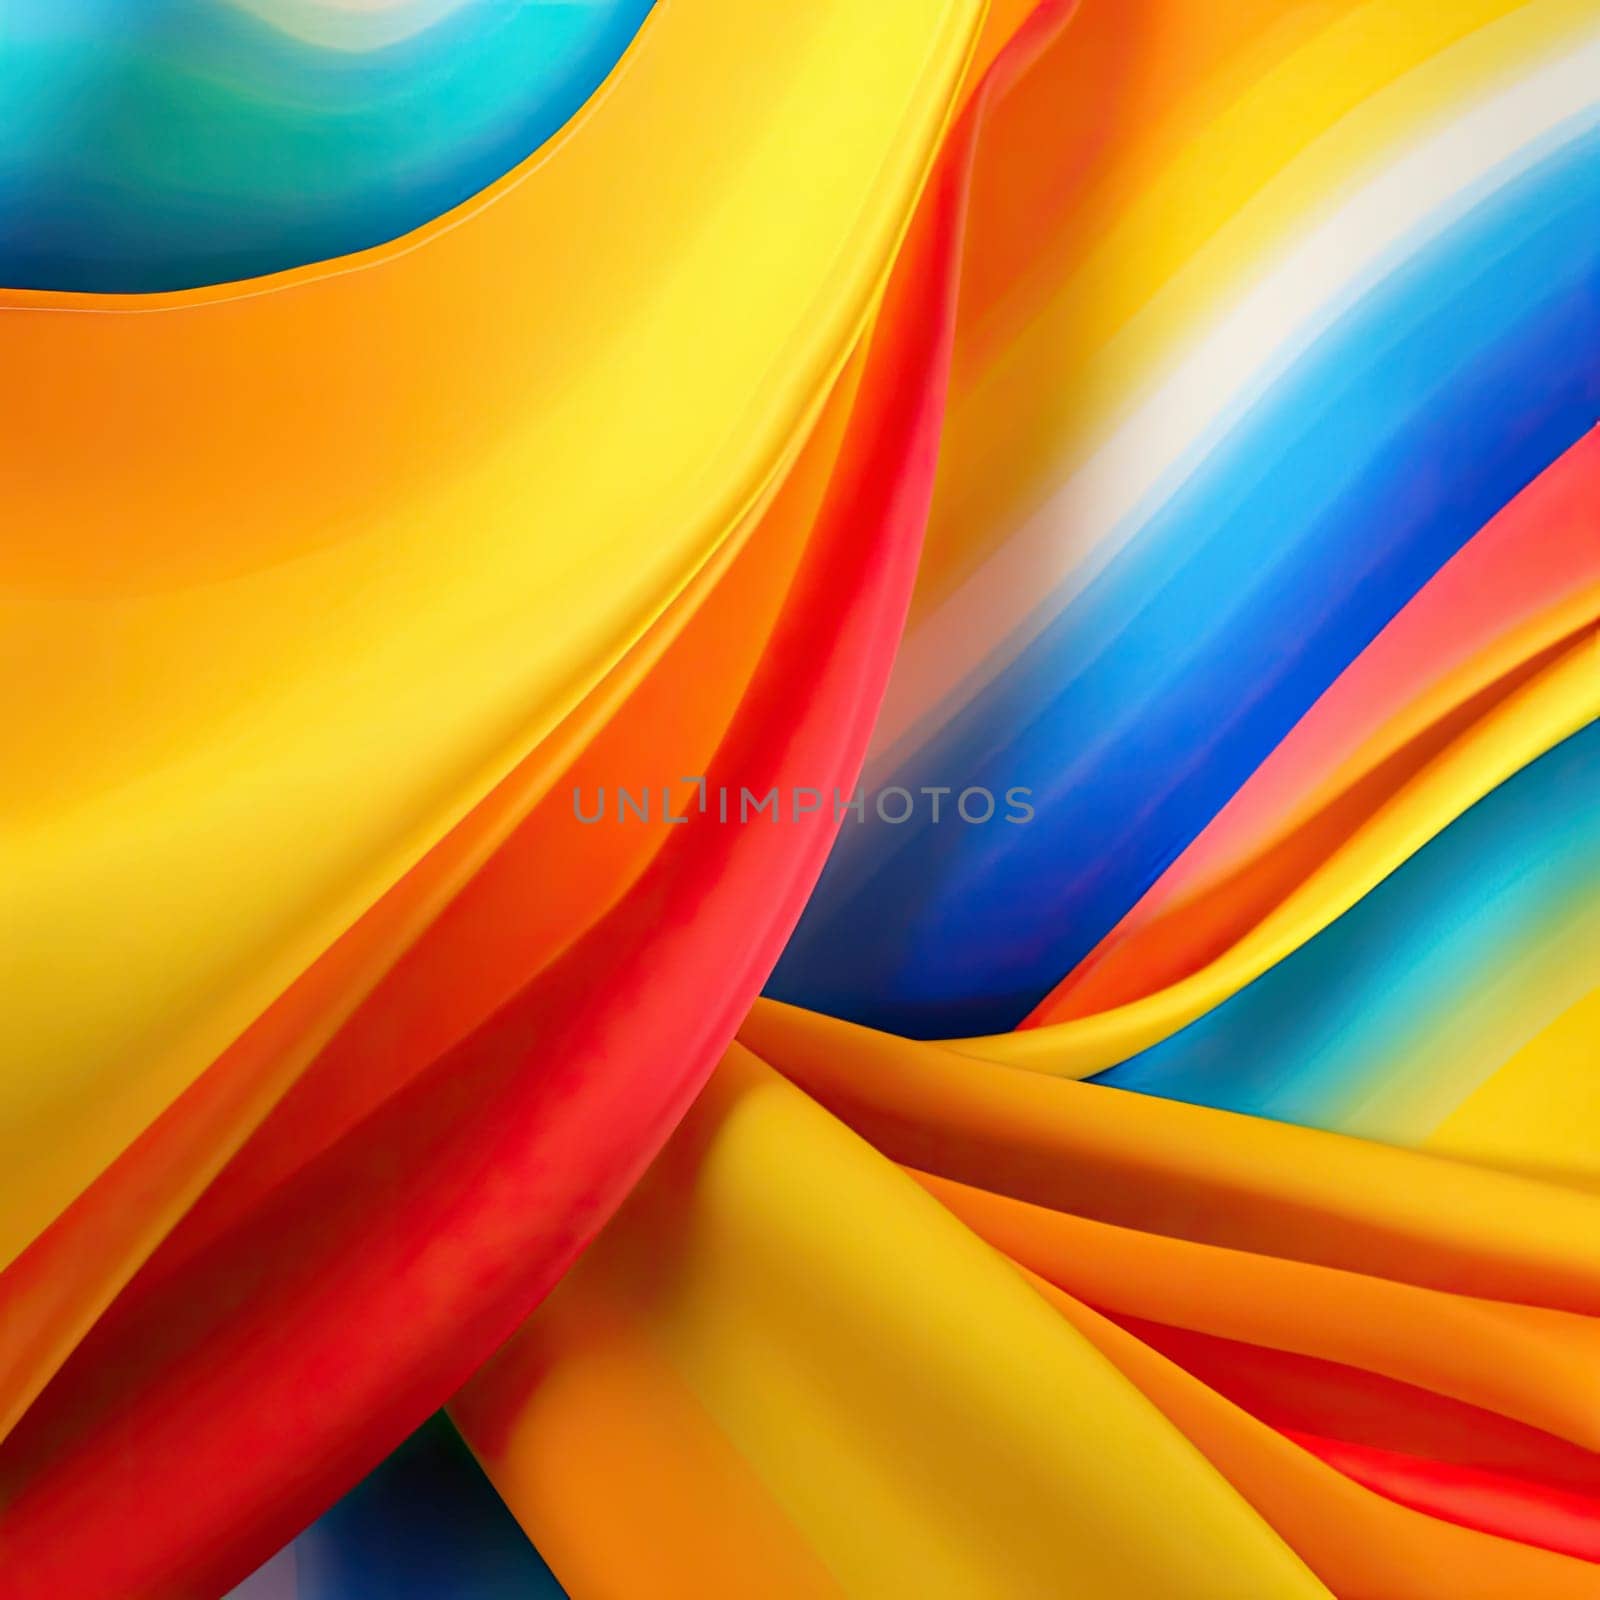 Abstract background of multicolored silk or satin fabric texture (ID: 001714)